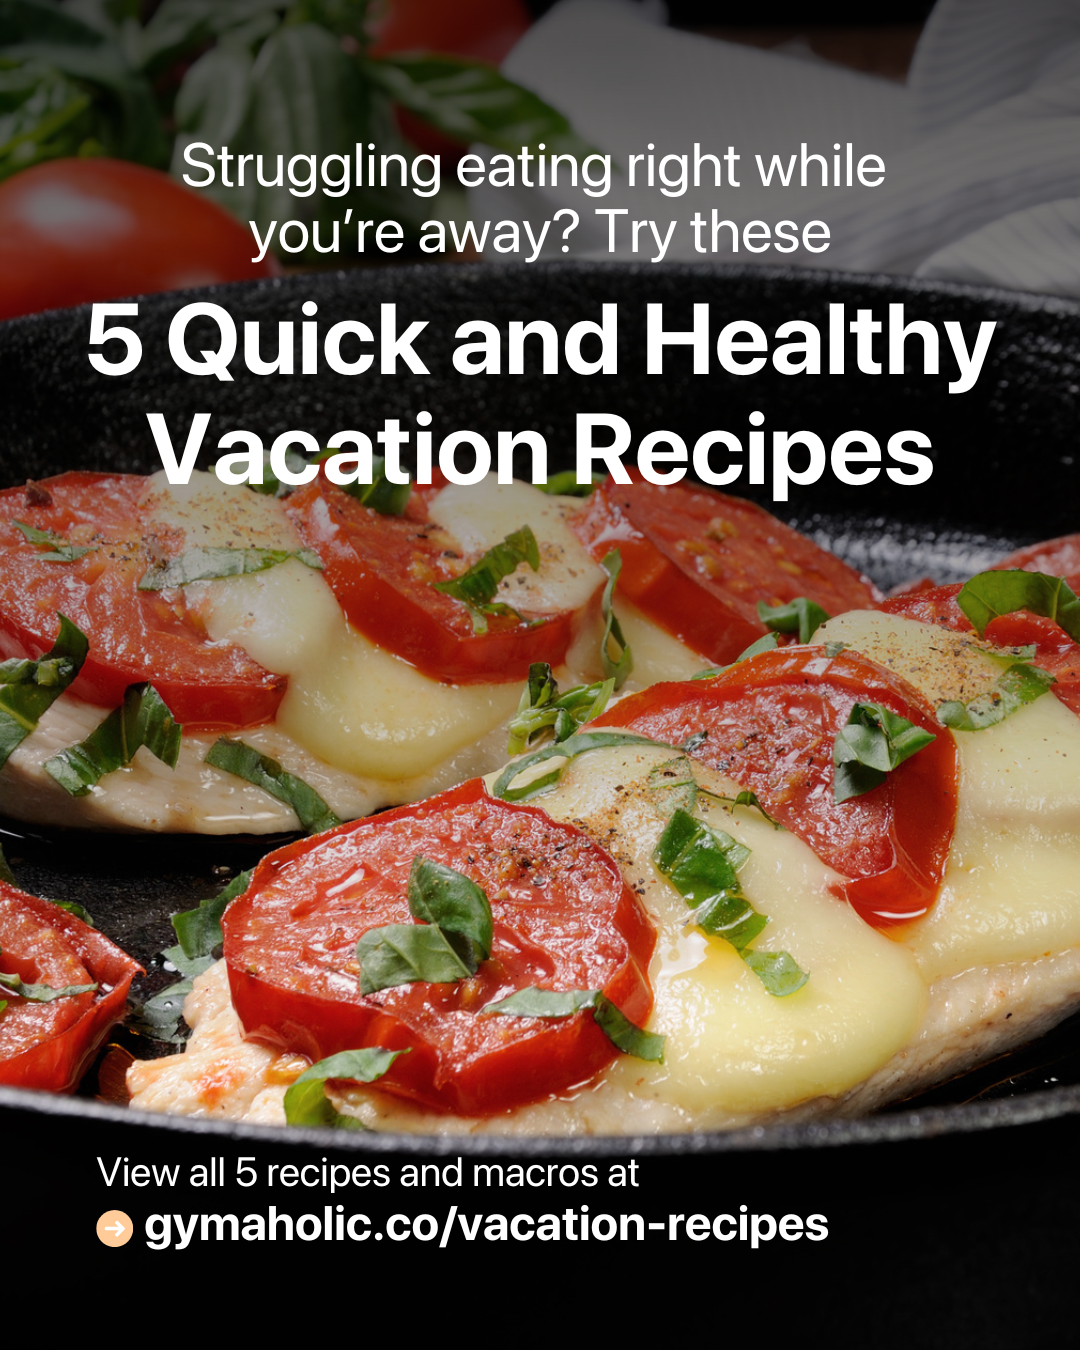 Whether you’re on vacation or simply want to keep watch of your nutrition,